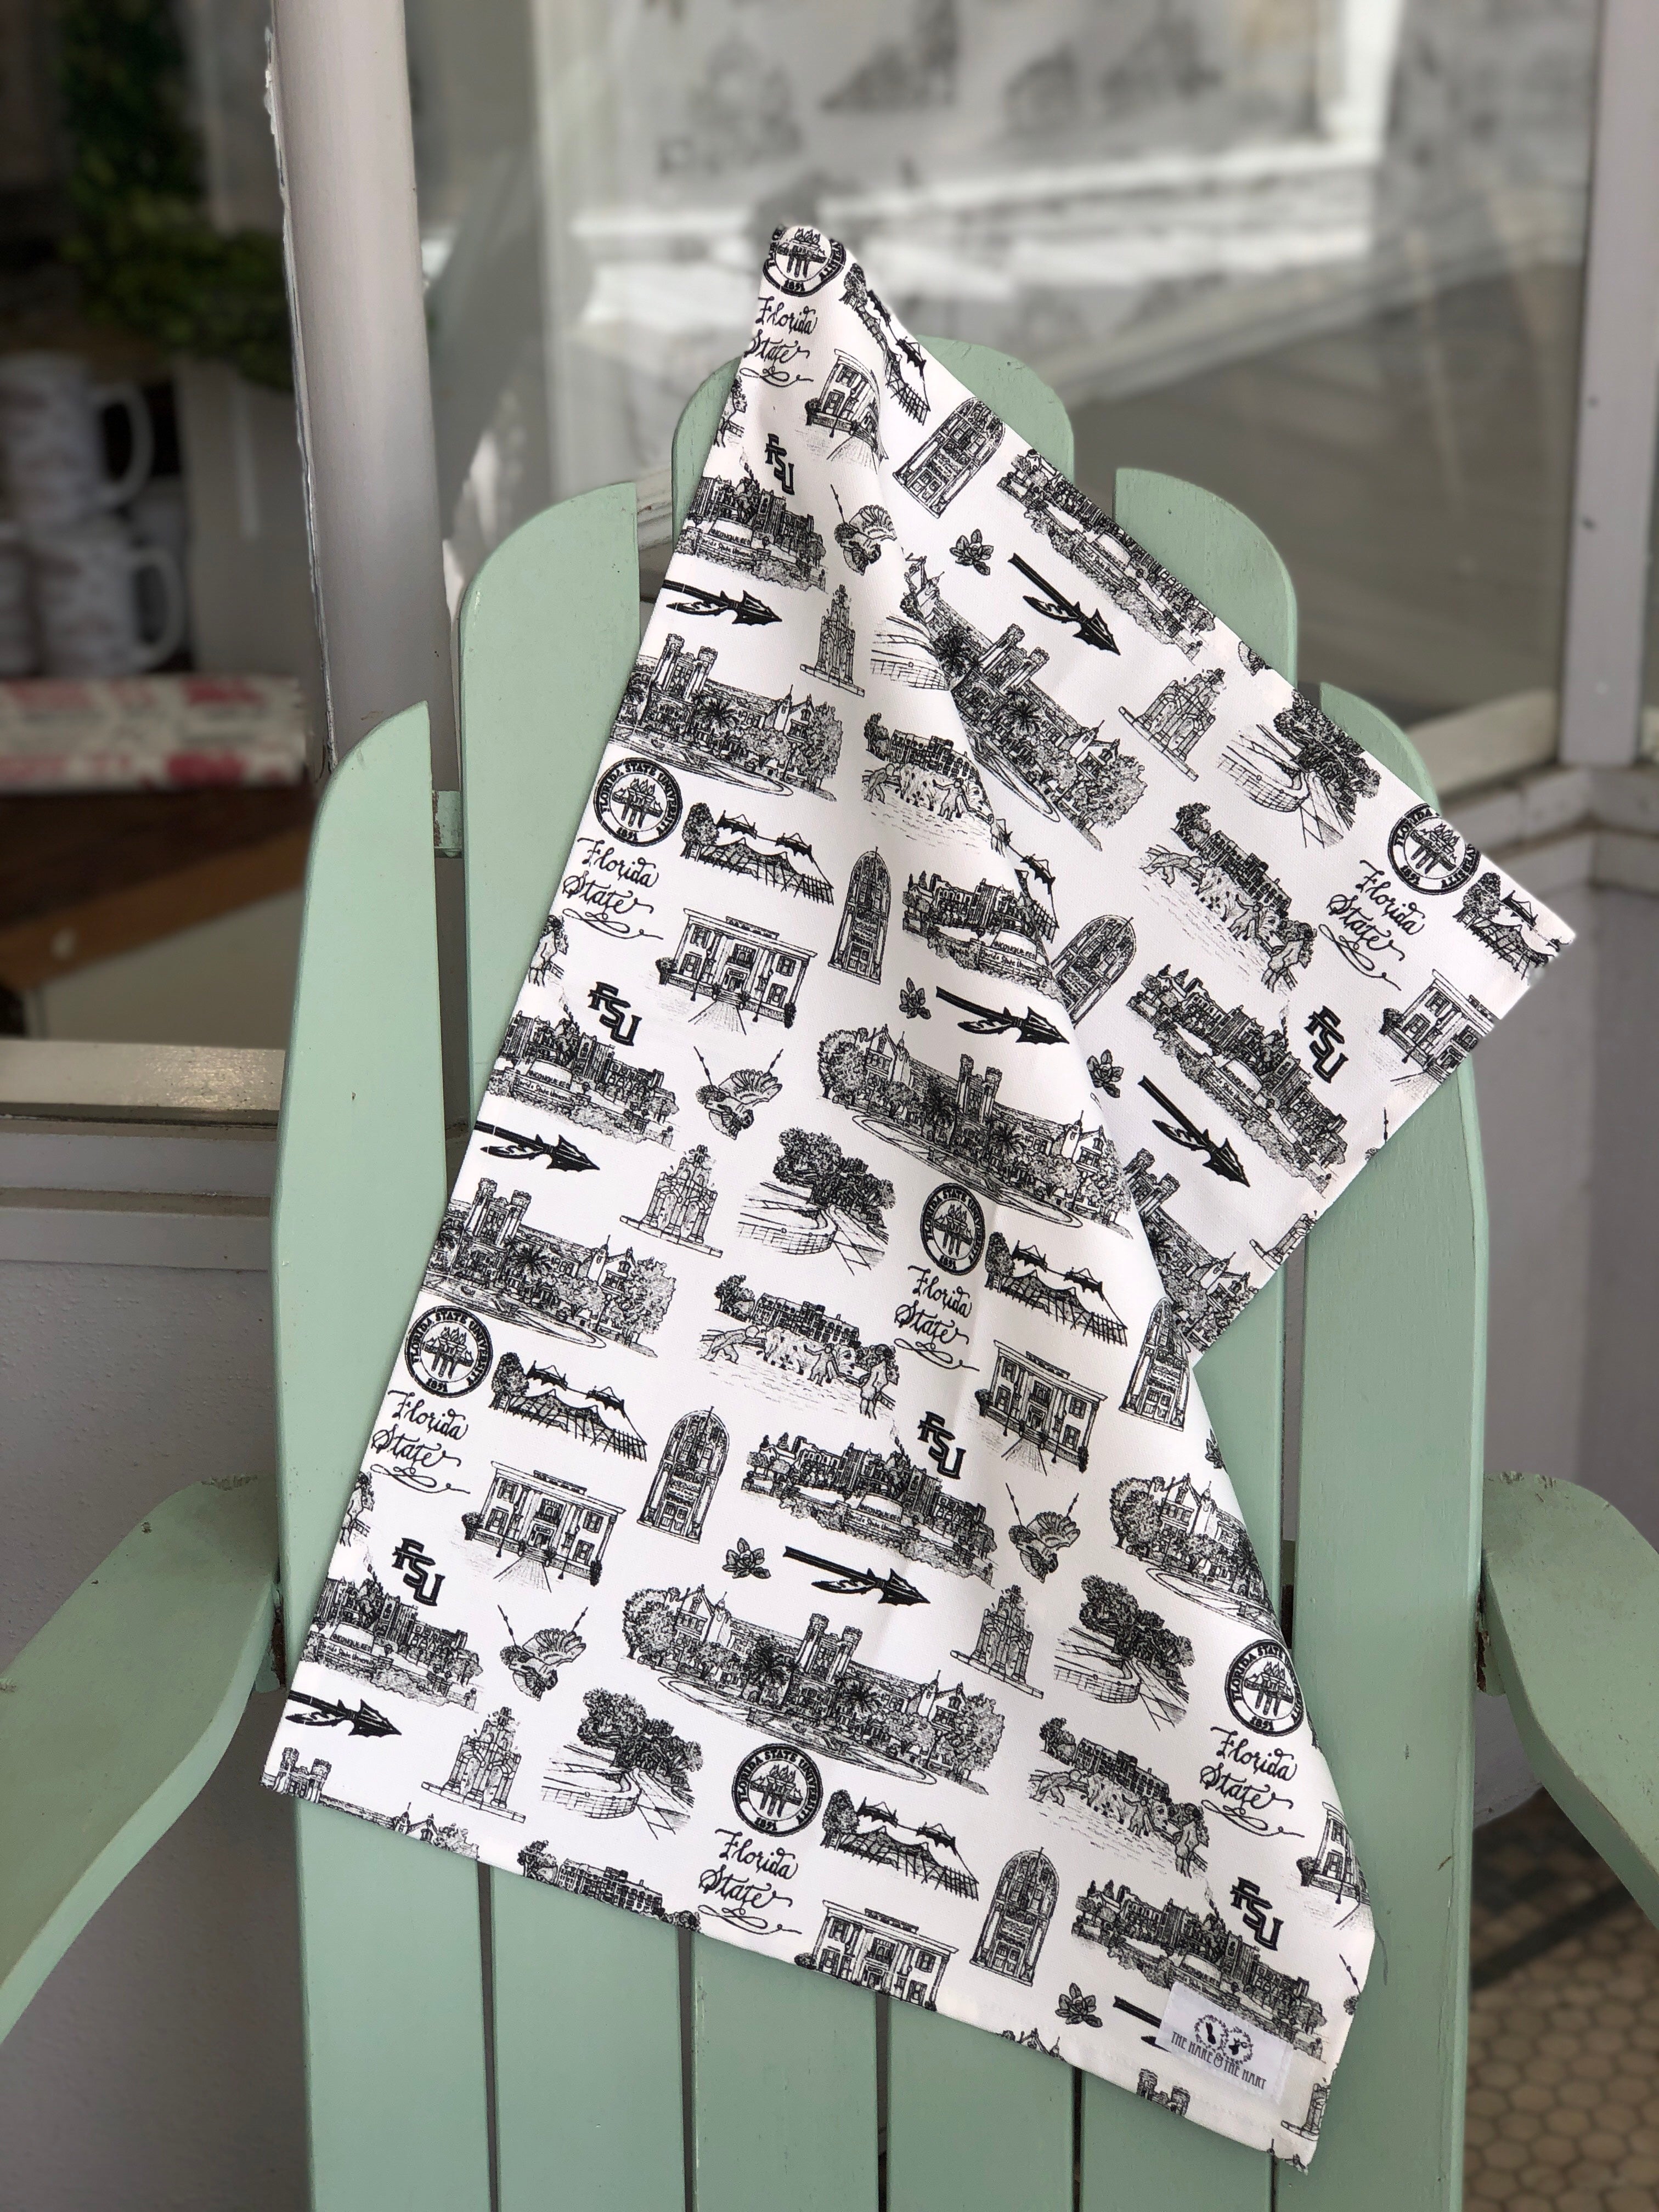 There is a tea towel made of Toile of FSU patterned fabric in black and white. The tea towel is hanging from the top of an adirondak chair.